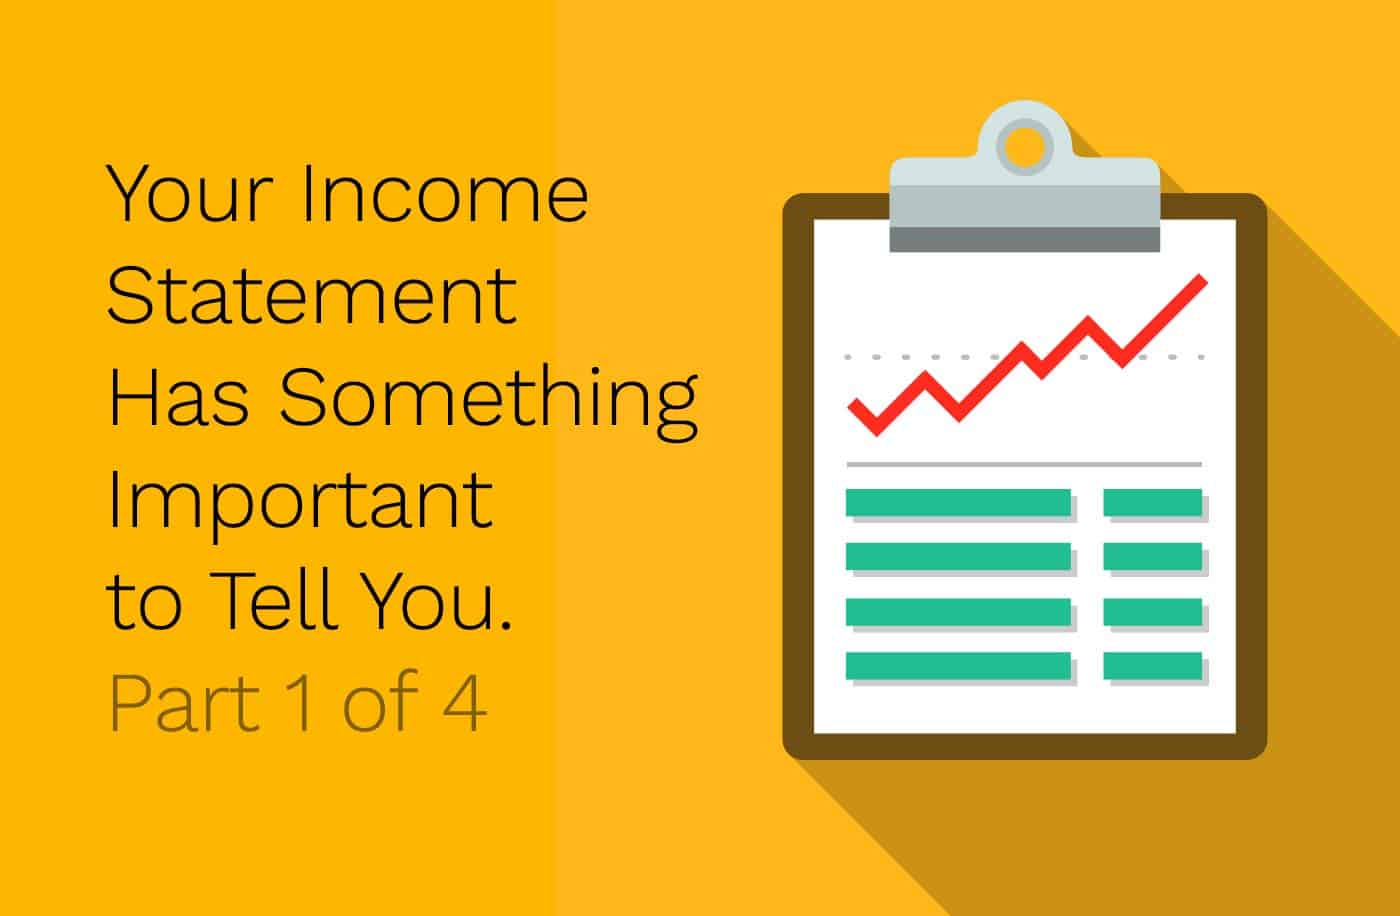 Your income statement has something important to tell you.